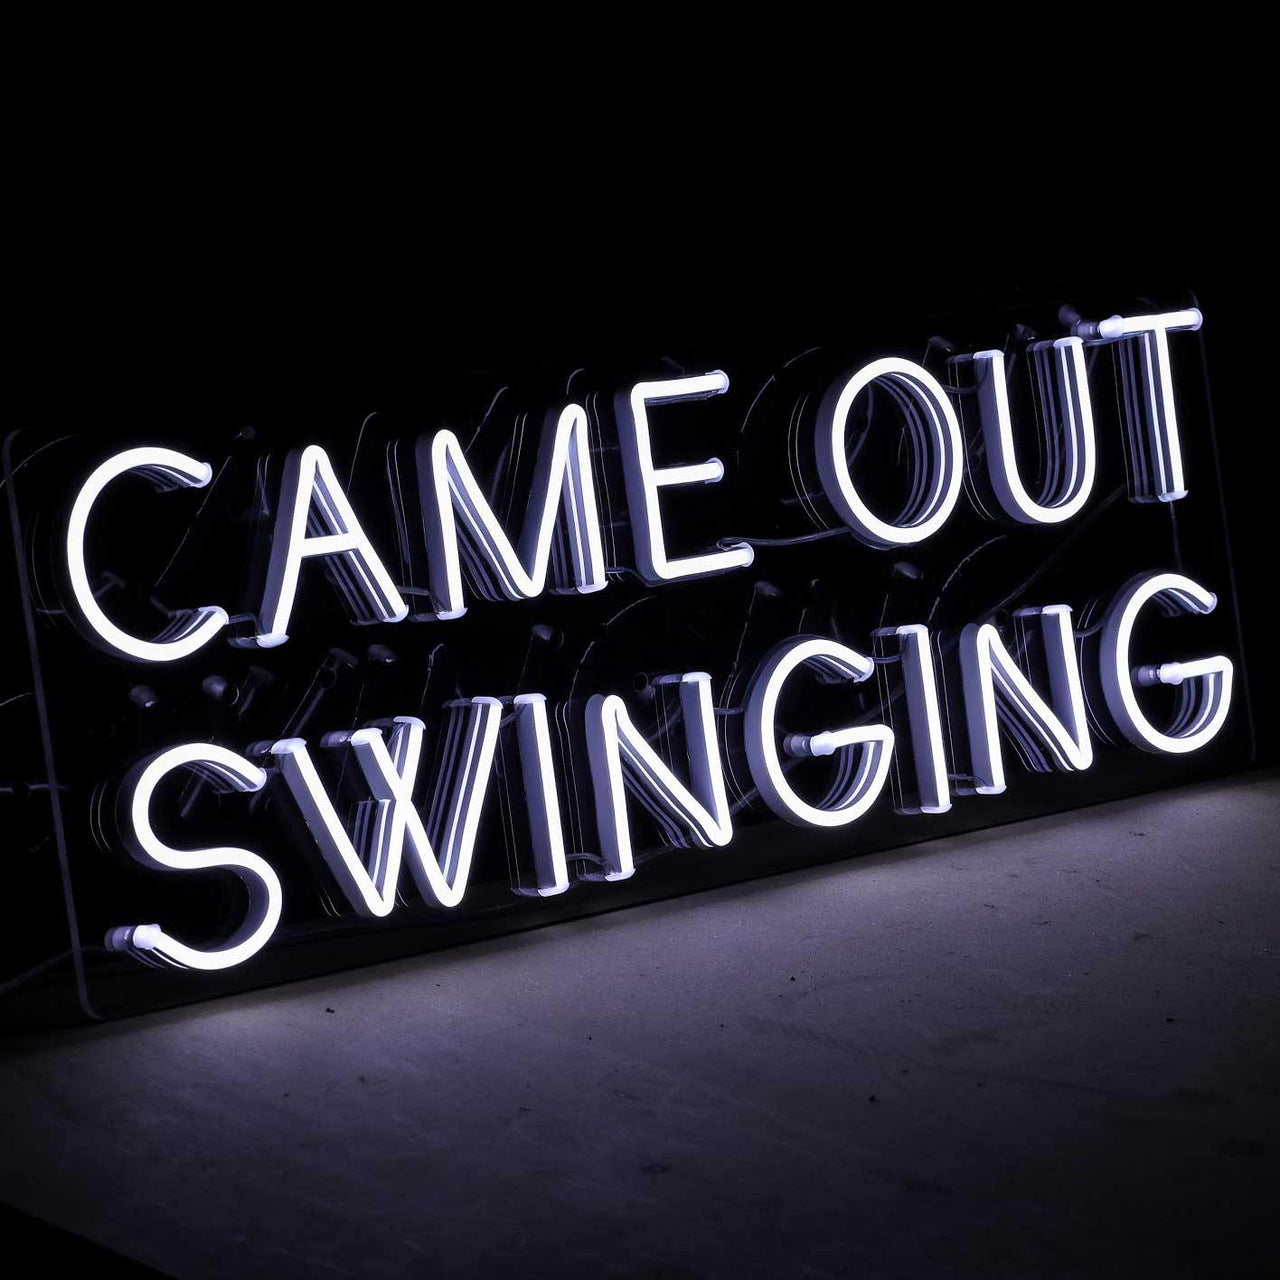 Buy – Came Out Swinging LED Neon Sign – The Wonder Years